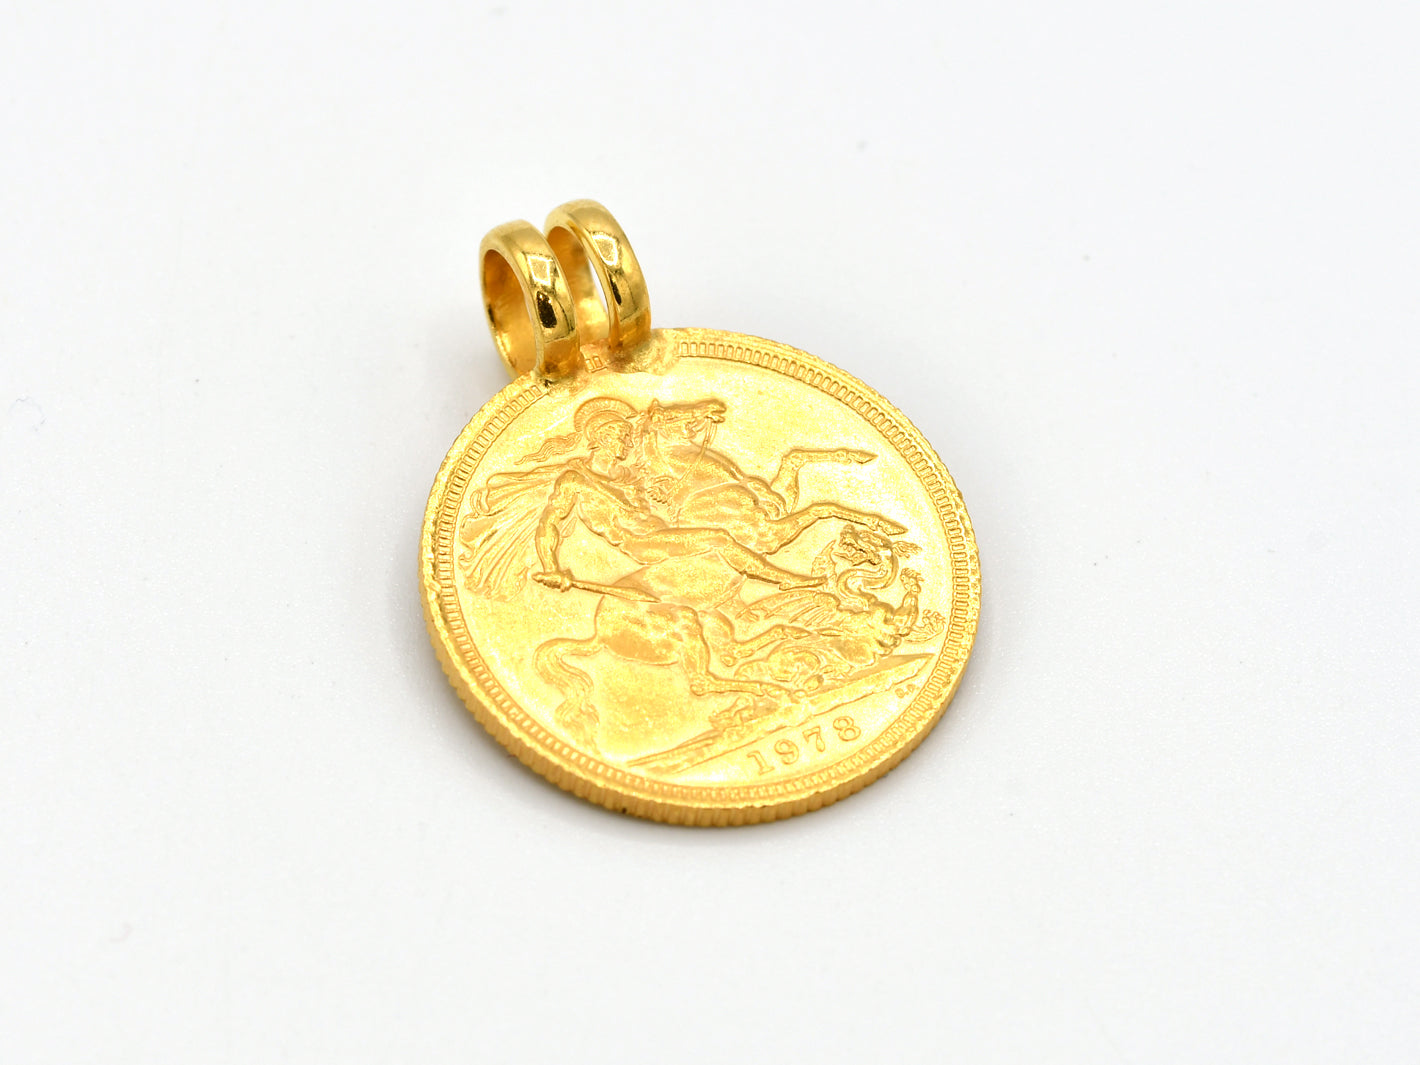 22ct Gold Sovereign Pendant - Roop Darshan